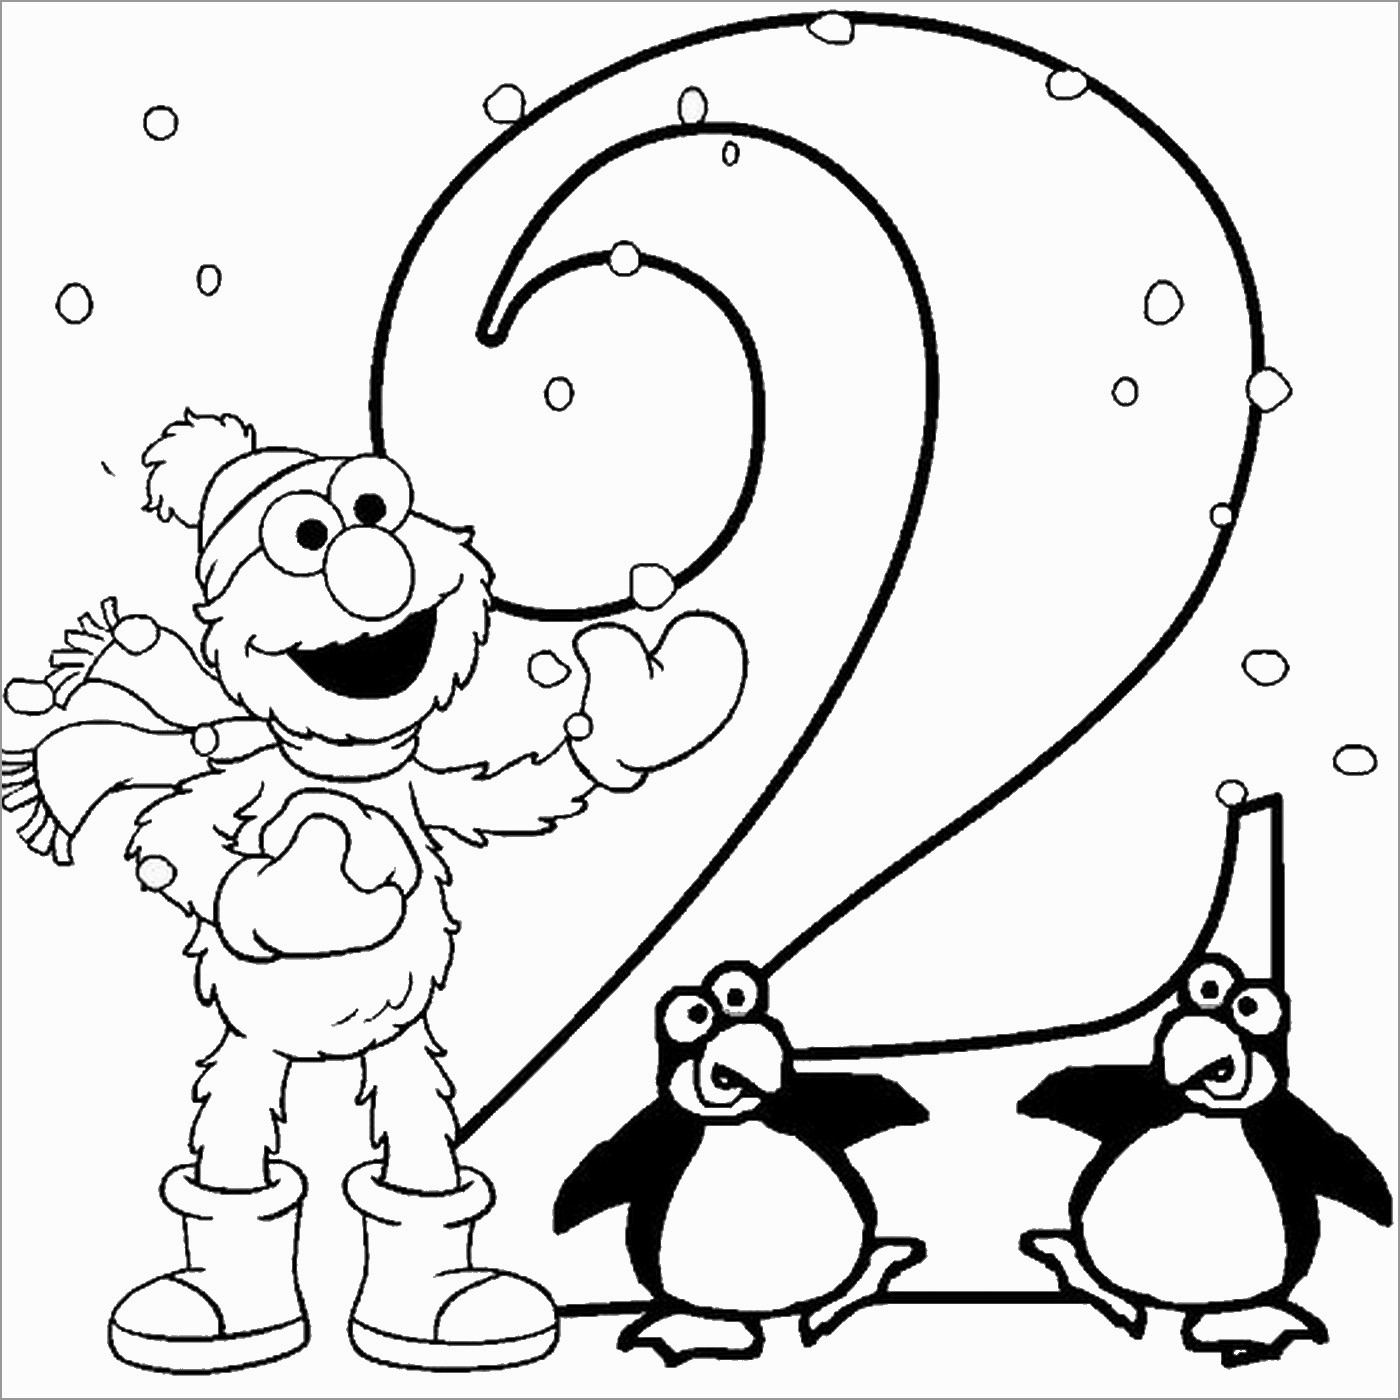 number-2-page-coloring-pages